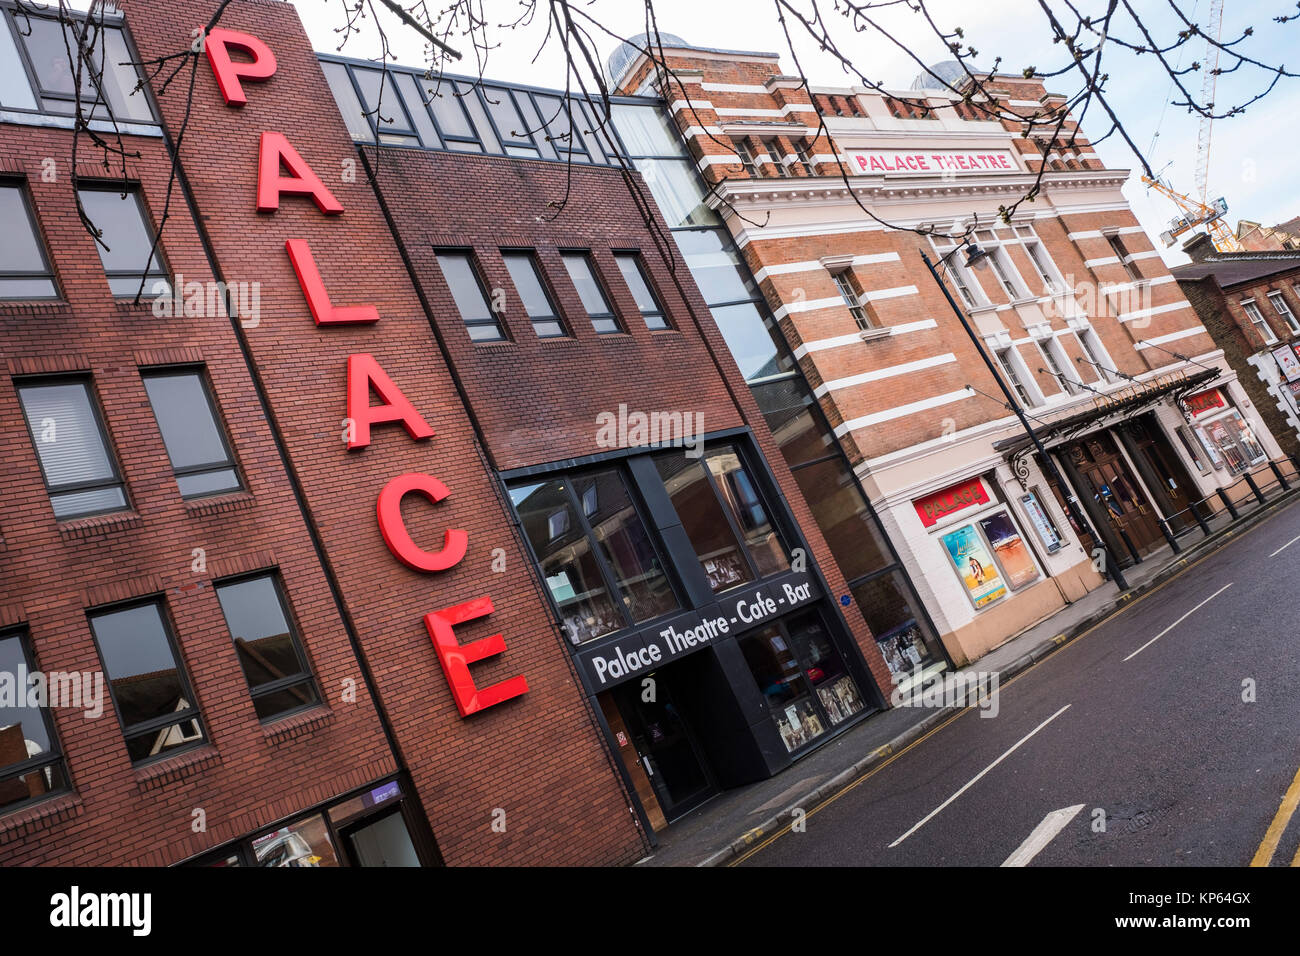 Palace Theatre, Watford, Hertfordshire, Angleterre, Royaume-Uni Banque D'Images